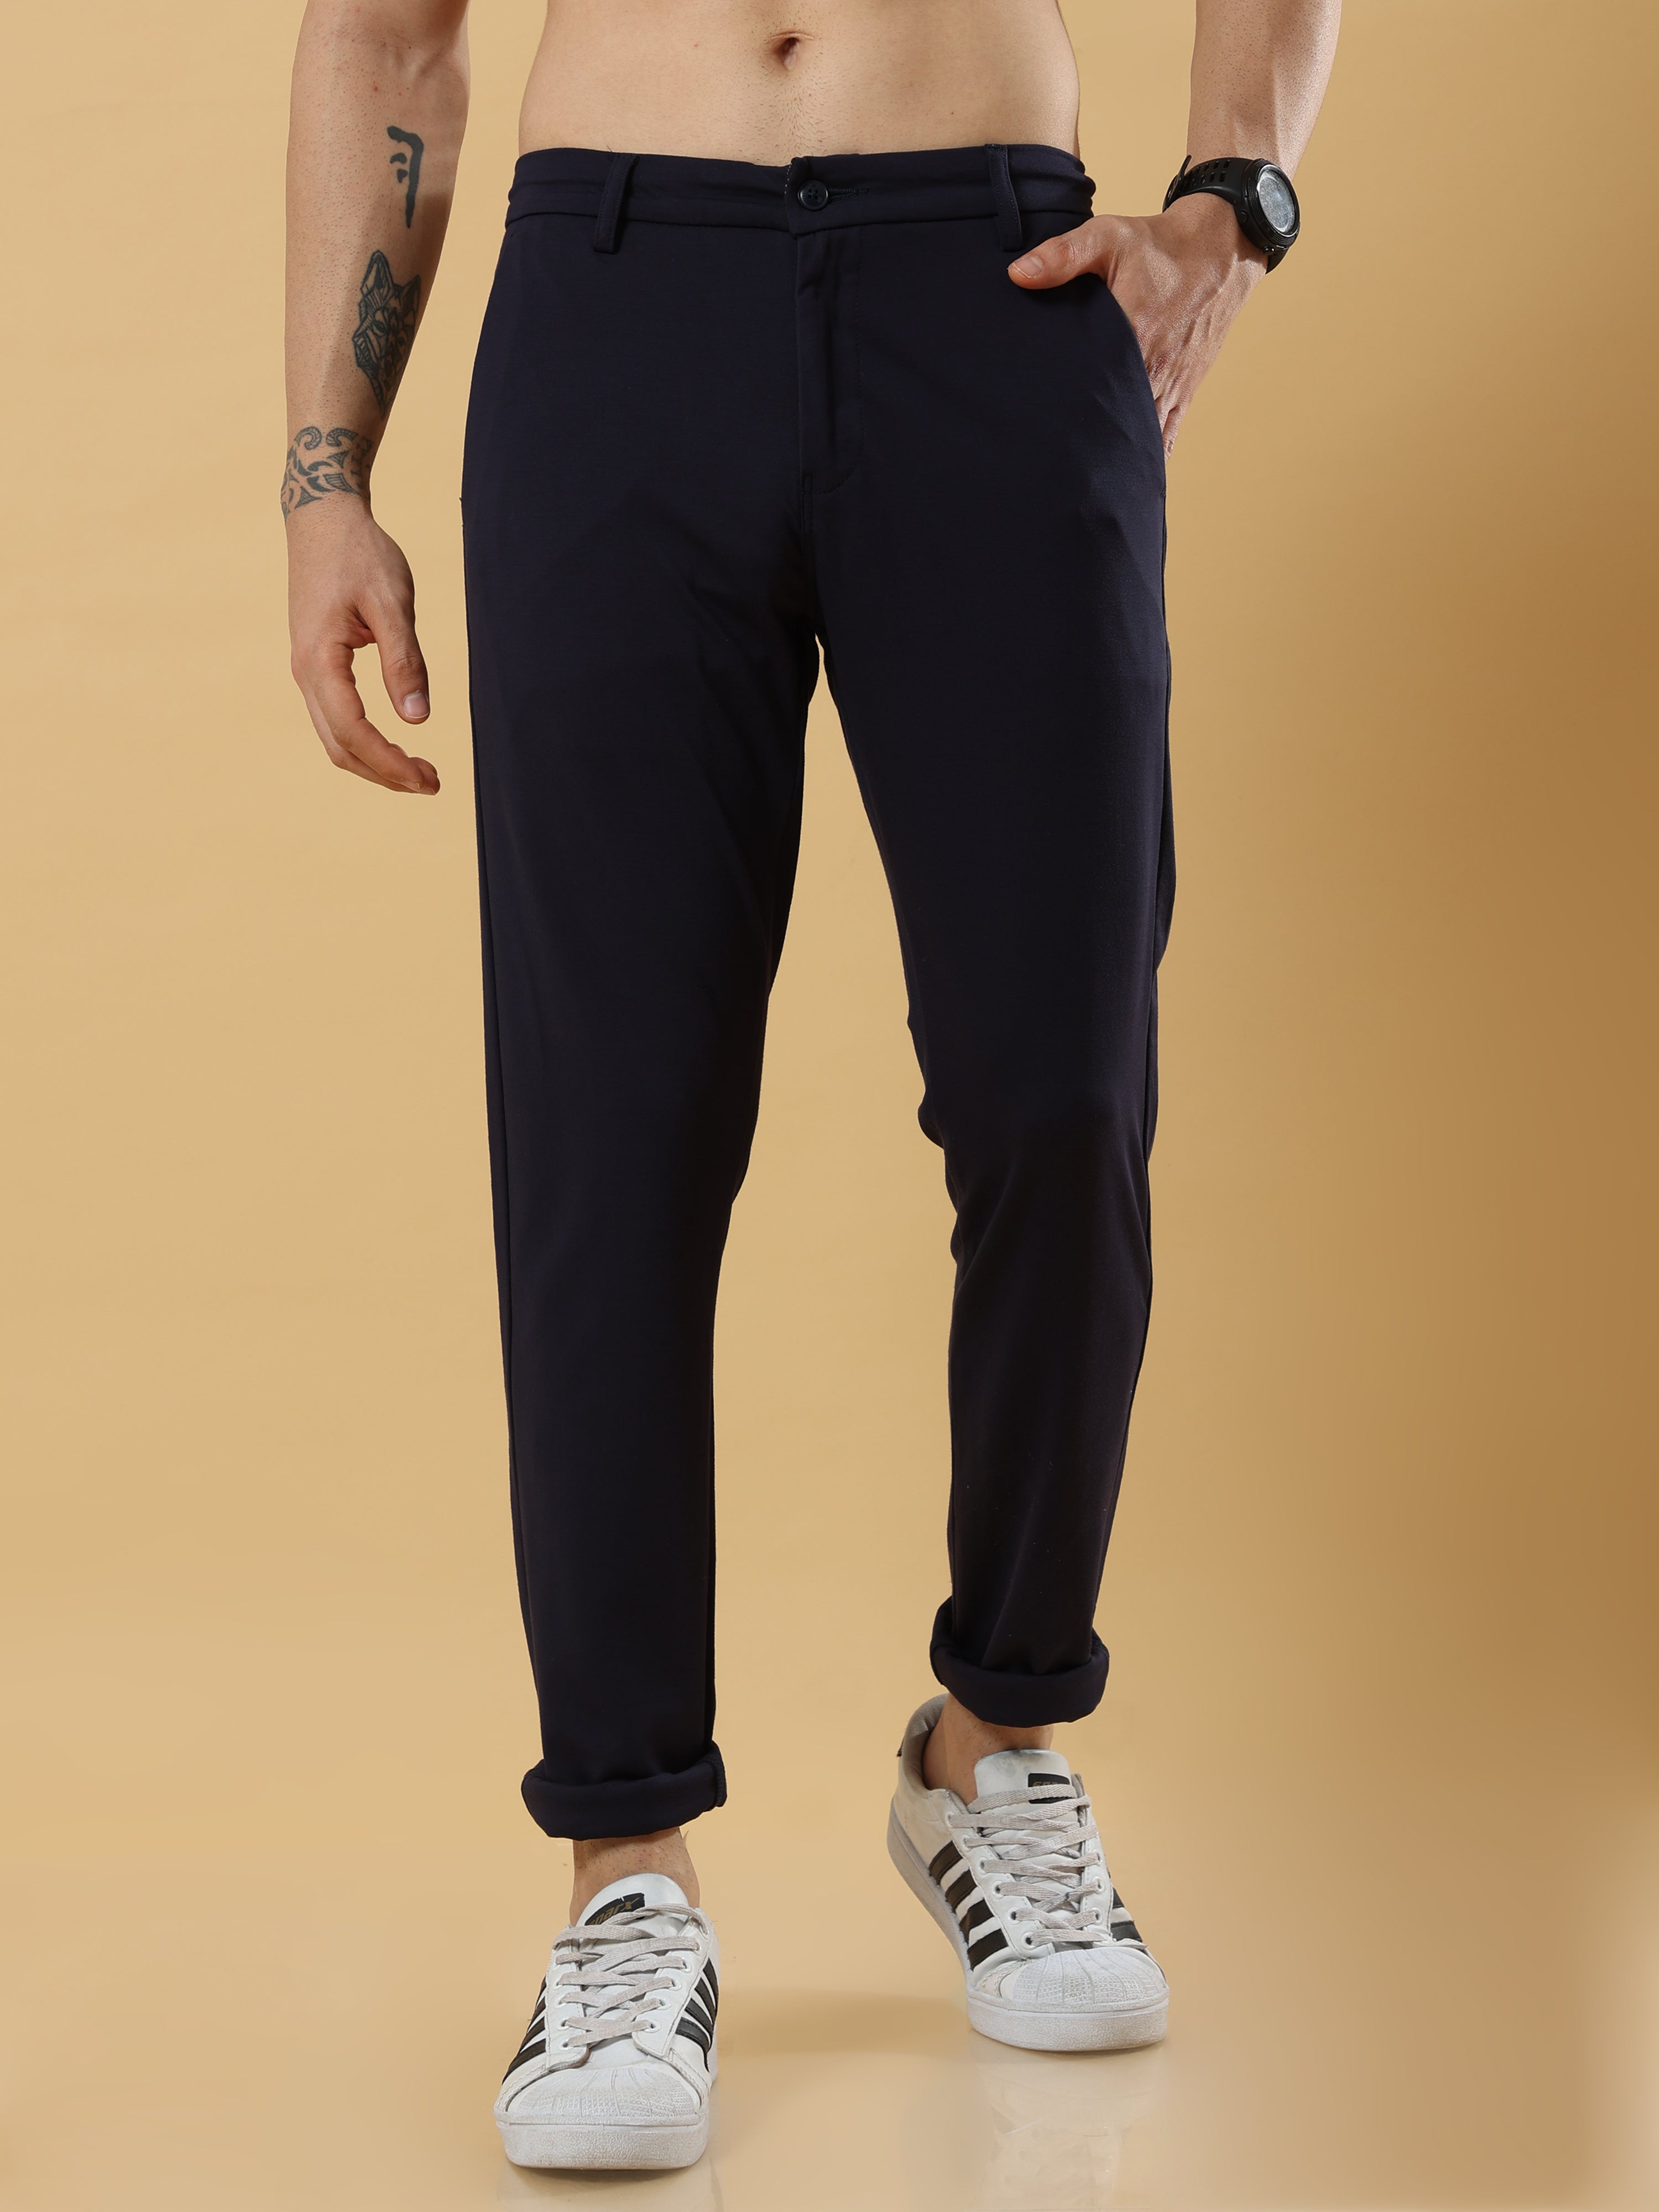 Mens Ice Silk Summer Pants Large Size, Stretchable, Breathable & Quick Dry  With Elastic Band 6XL Black Smart Work Trousers Style #230223 From Kong003,  $11.91 | DHgate.Com